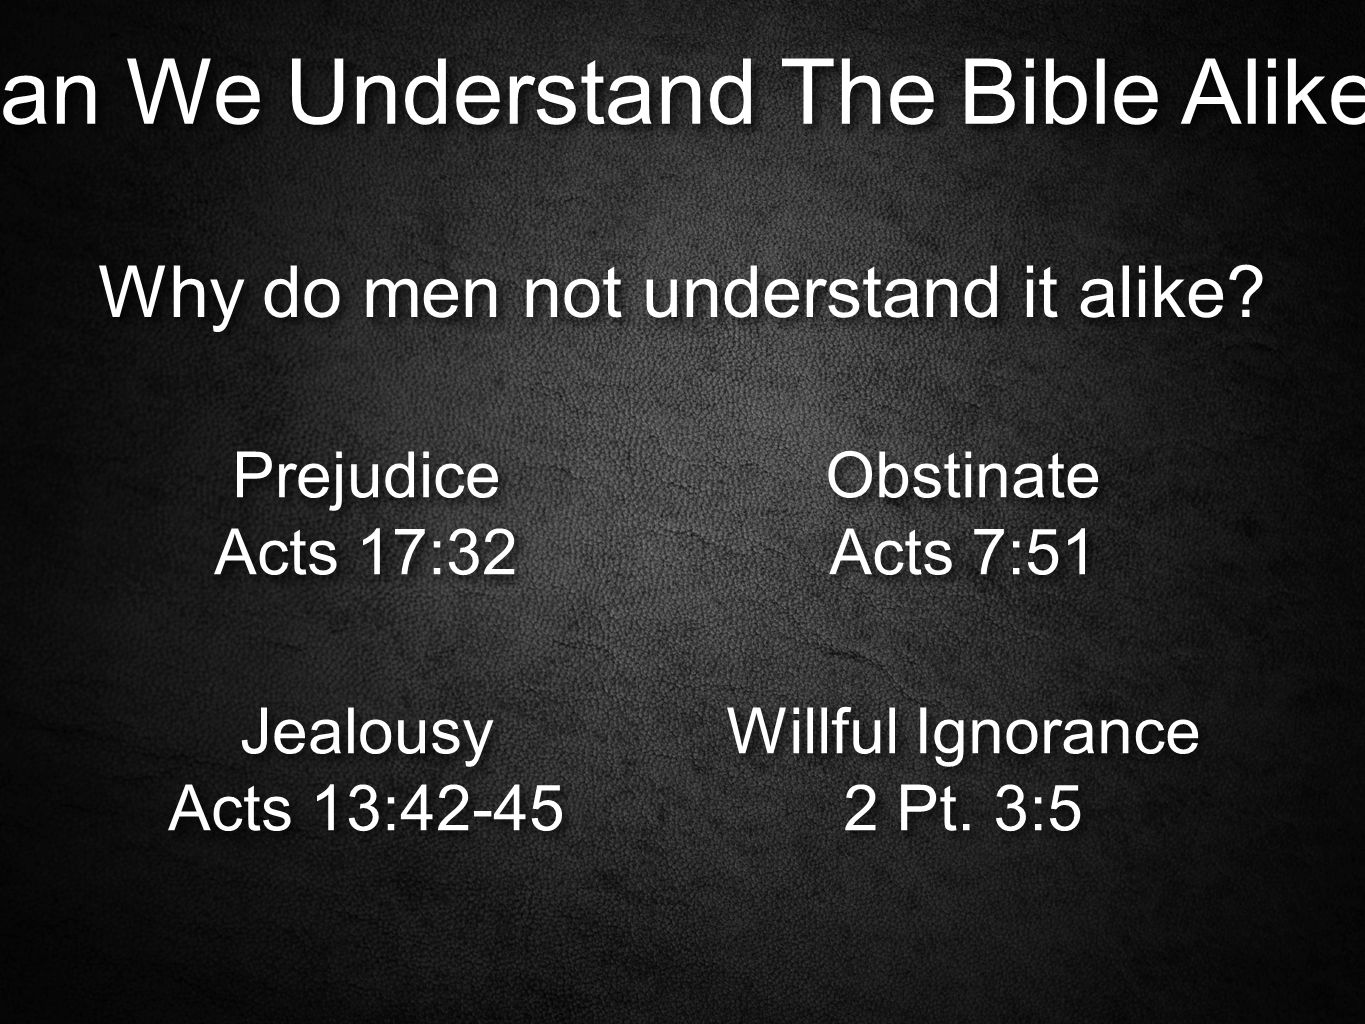 Can We Understand The Bible Alike. Why do men not understand it alike.